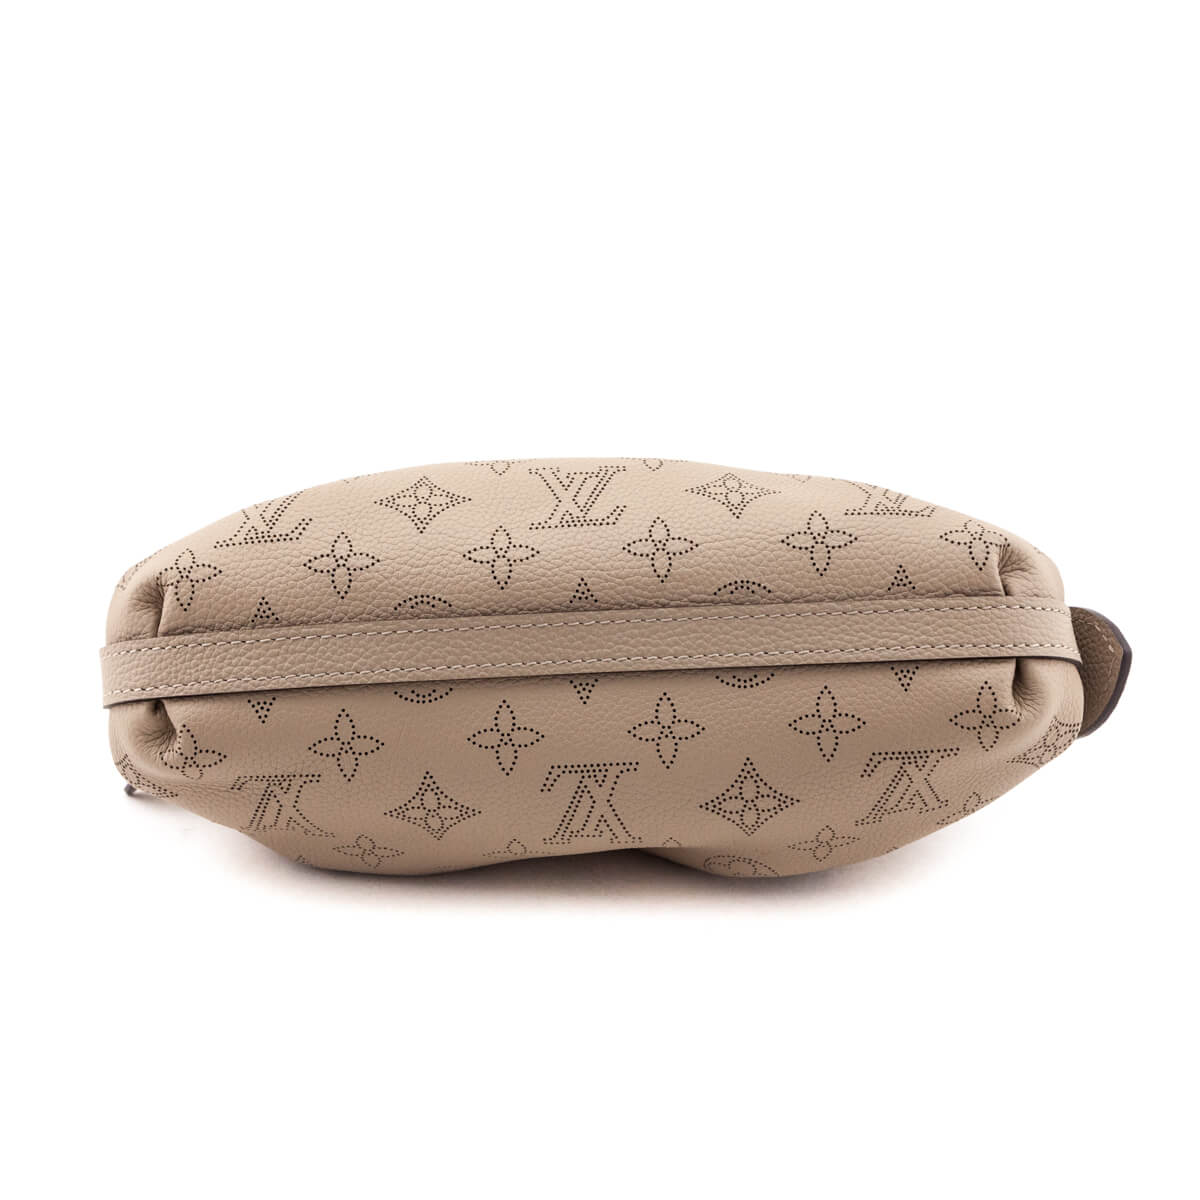 Louis Vuitton Galet Mahina Scala Mini Pouch - Love that Bag etc - Preowned Authentic Designer Handbags & Preloved Fashions